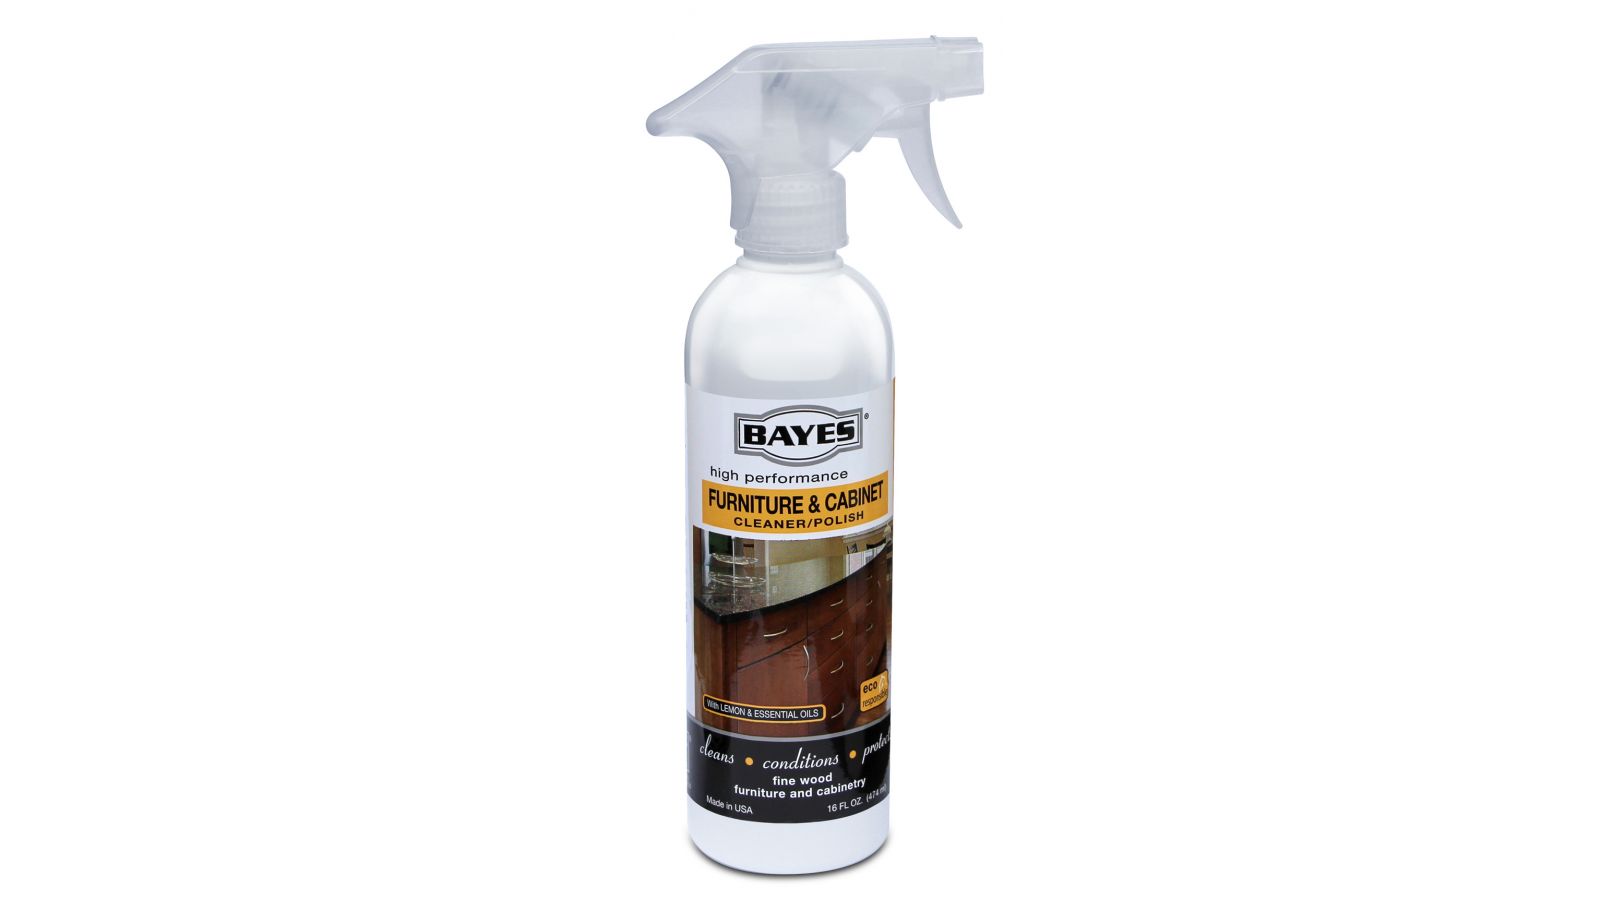 Bayes High-Performance Furniture, Cabinet Cleaner and Polish - Cleans, Conditions, and Preserves Fine Wood Furniture and Cabinetry